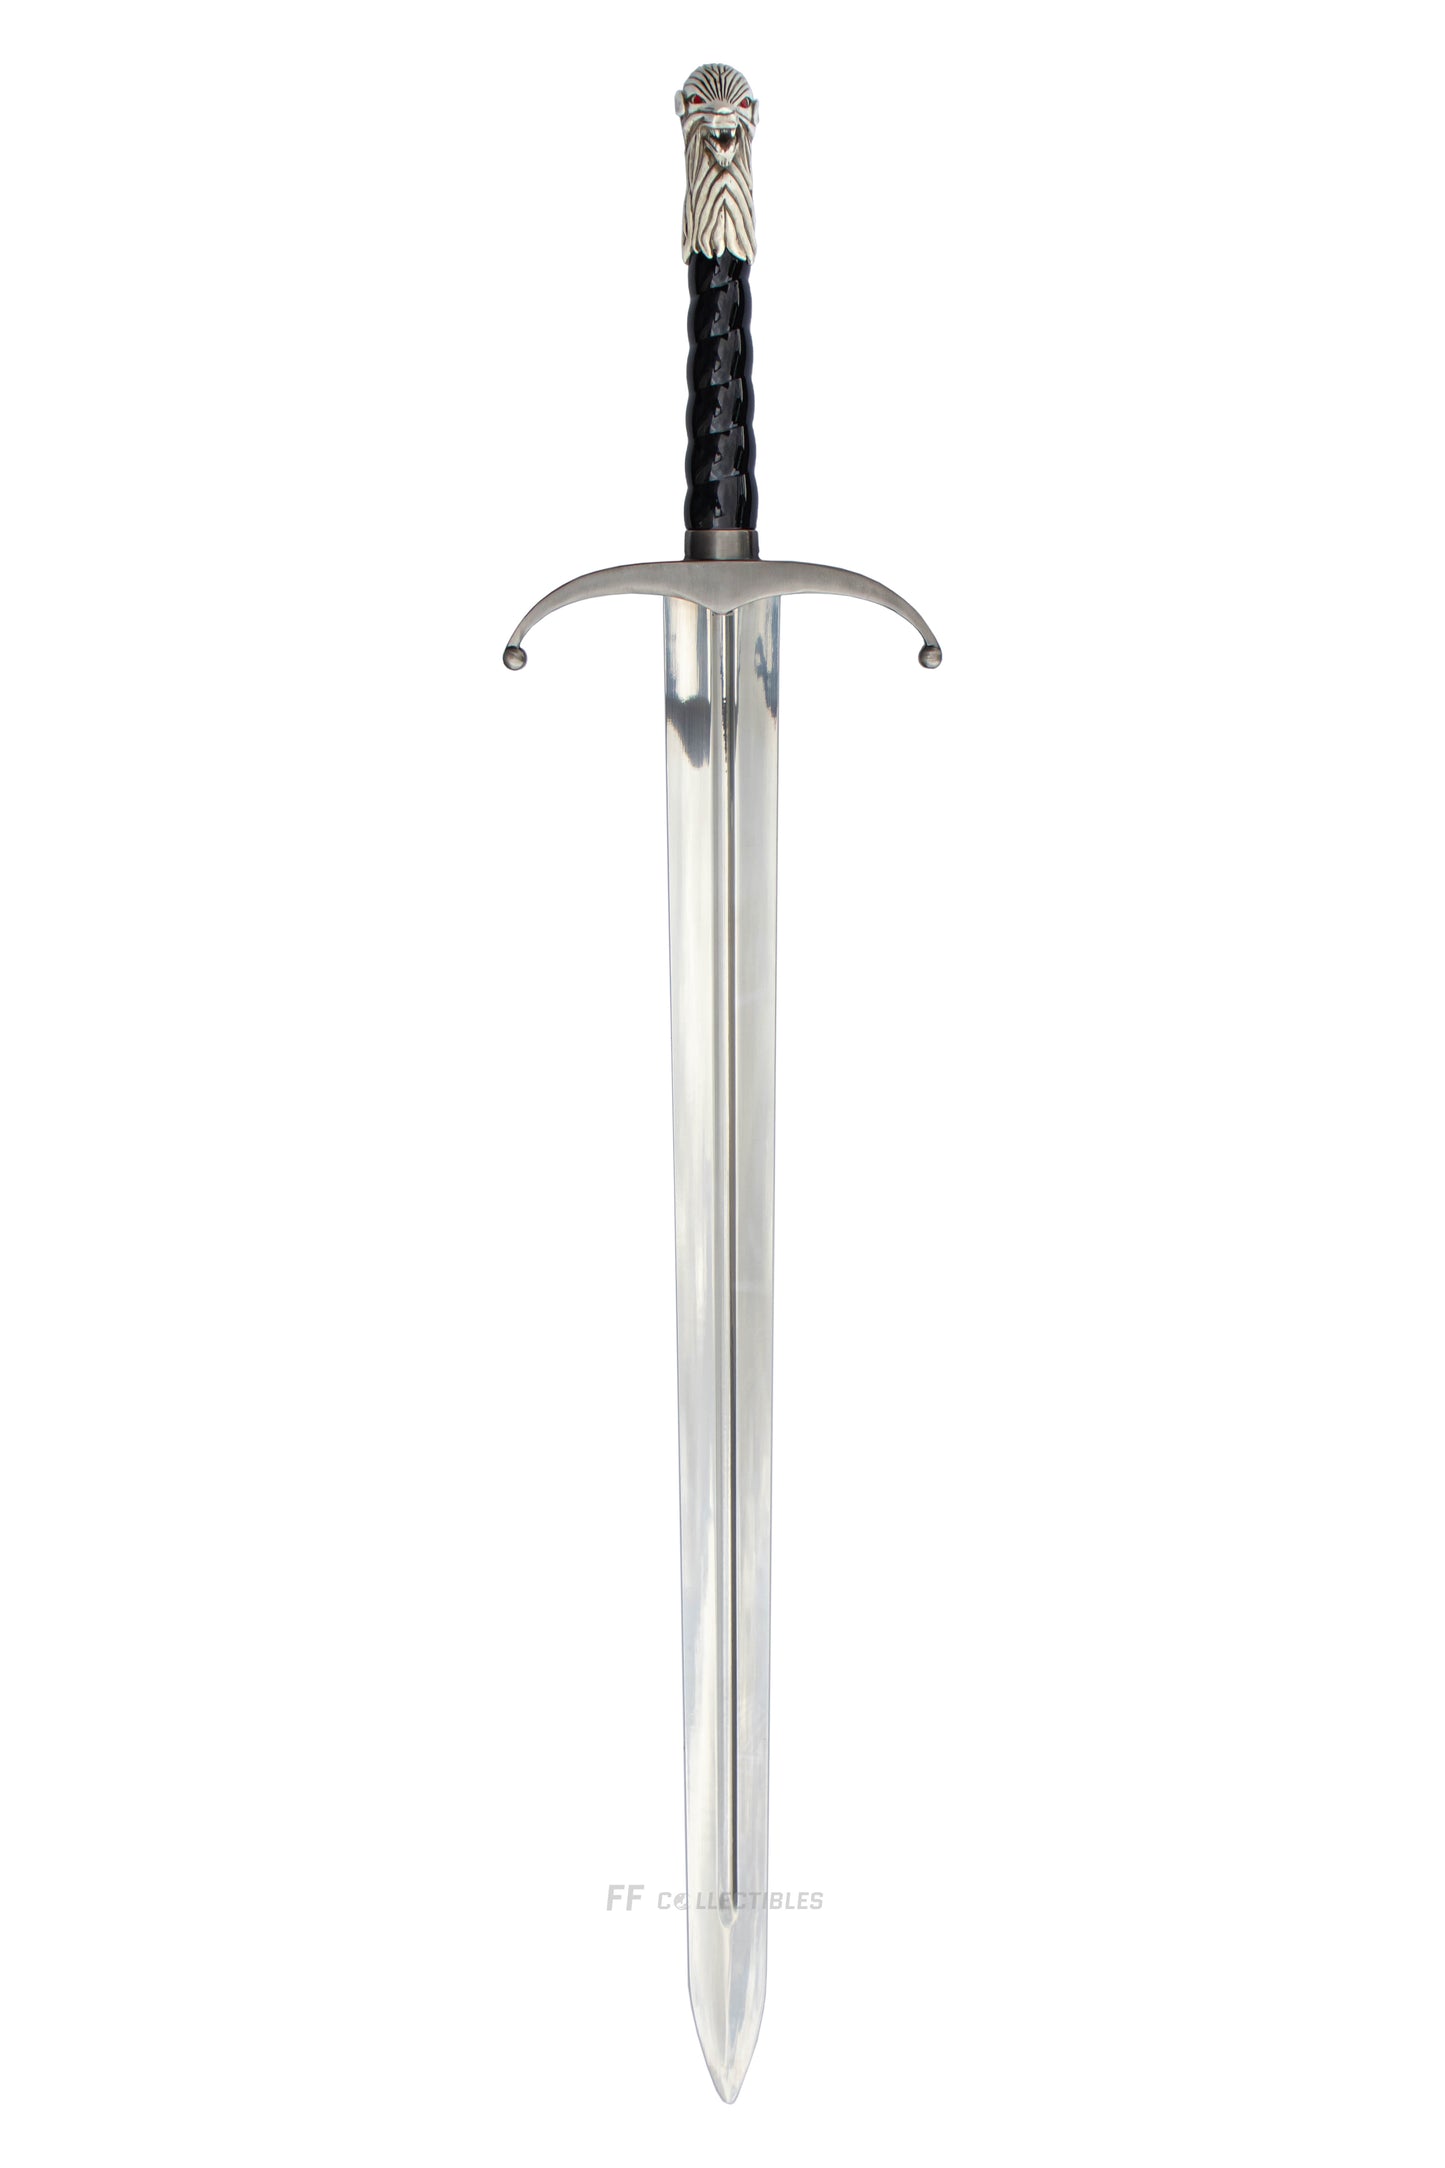 GAME OF THRONES - LONGCLAW (HBO), THE SWORD OF JON SNOW (with FREE WALL PLAQUE)